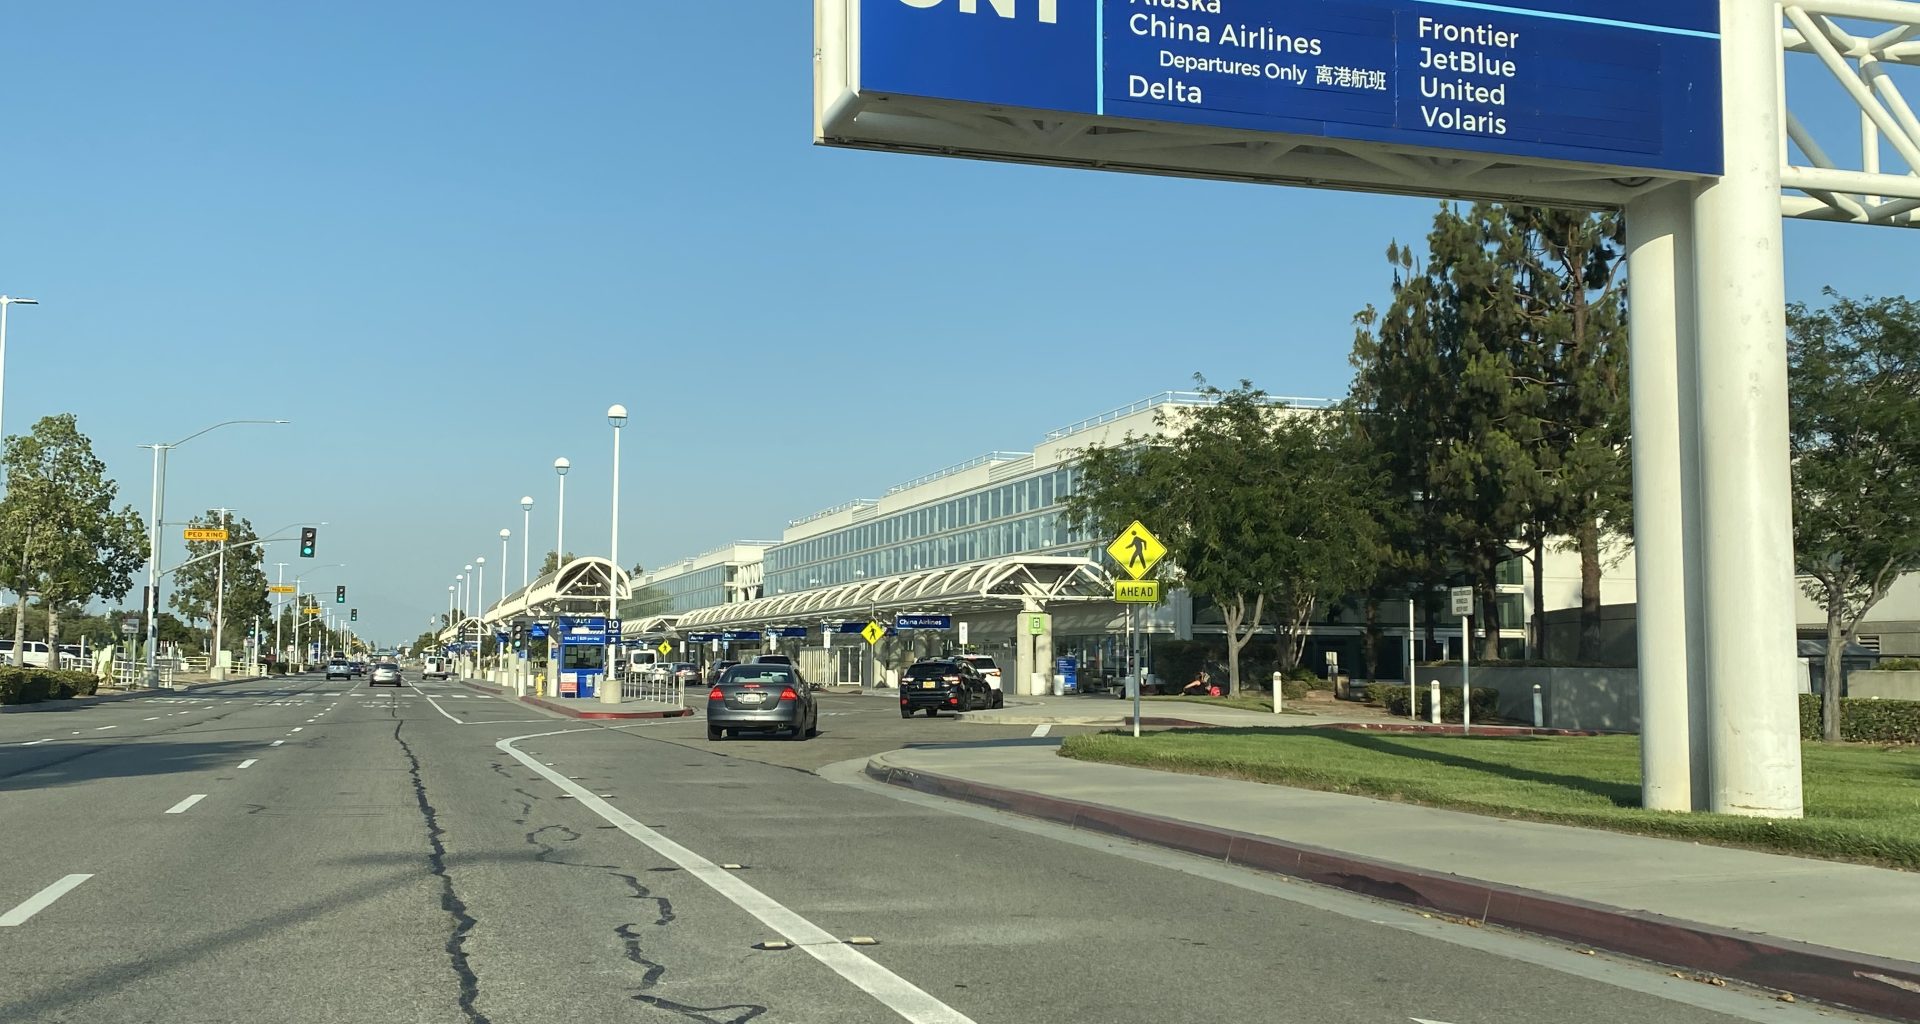 ONT Airport, California, has two terminals